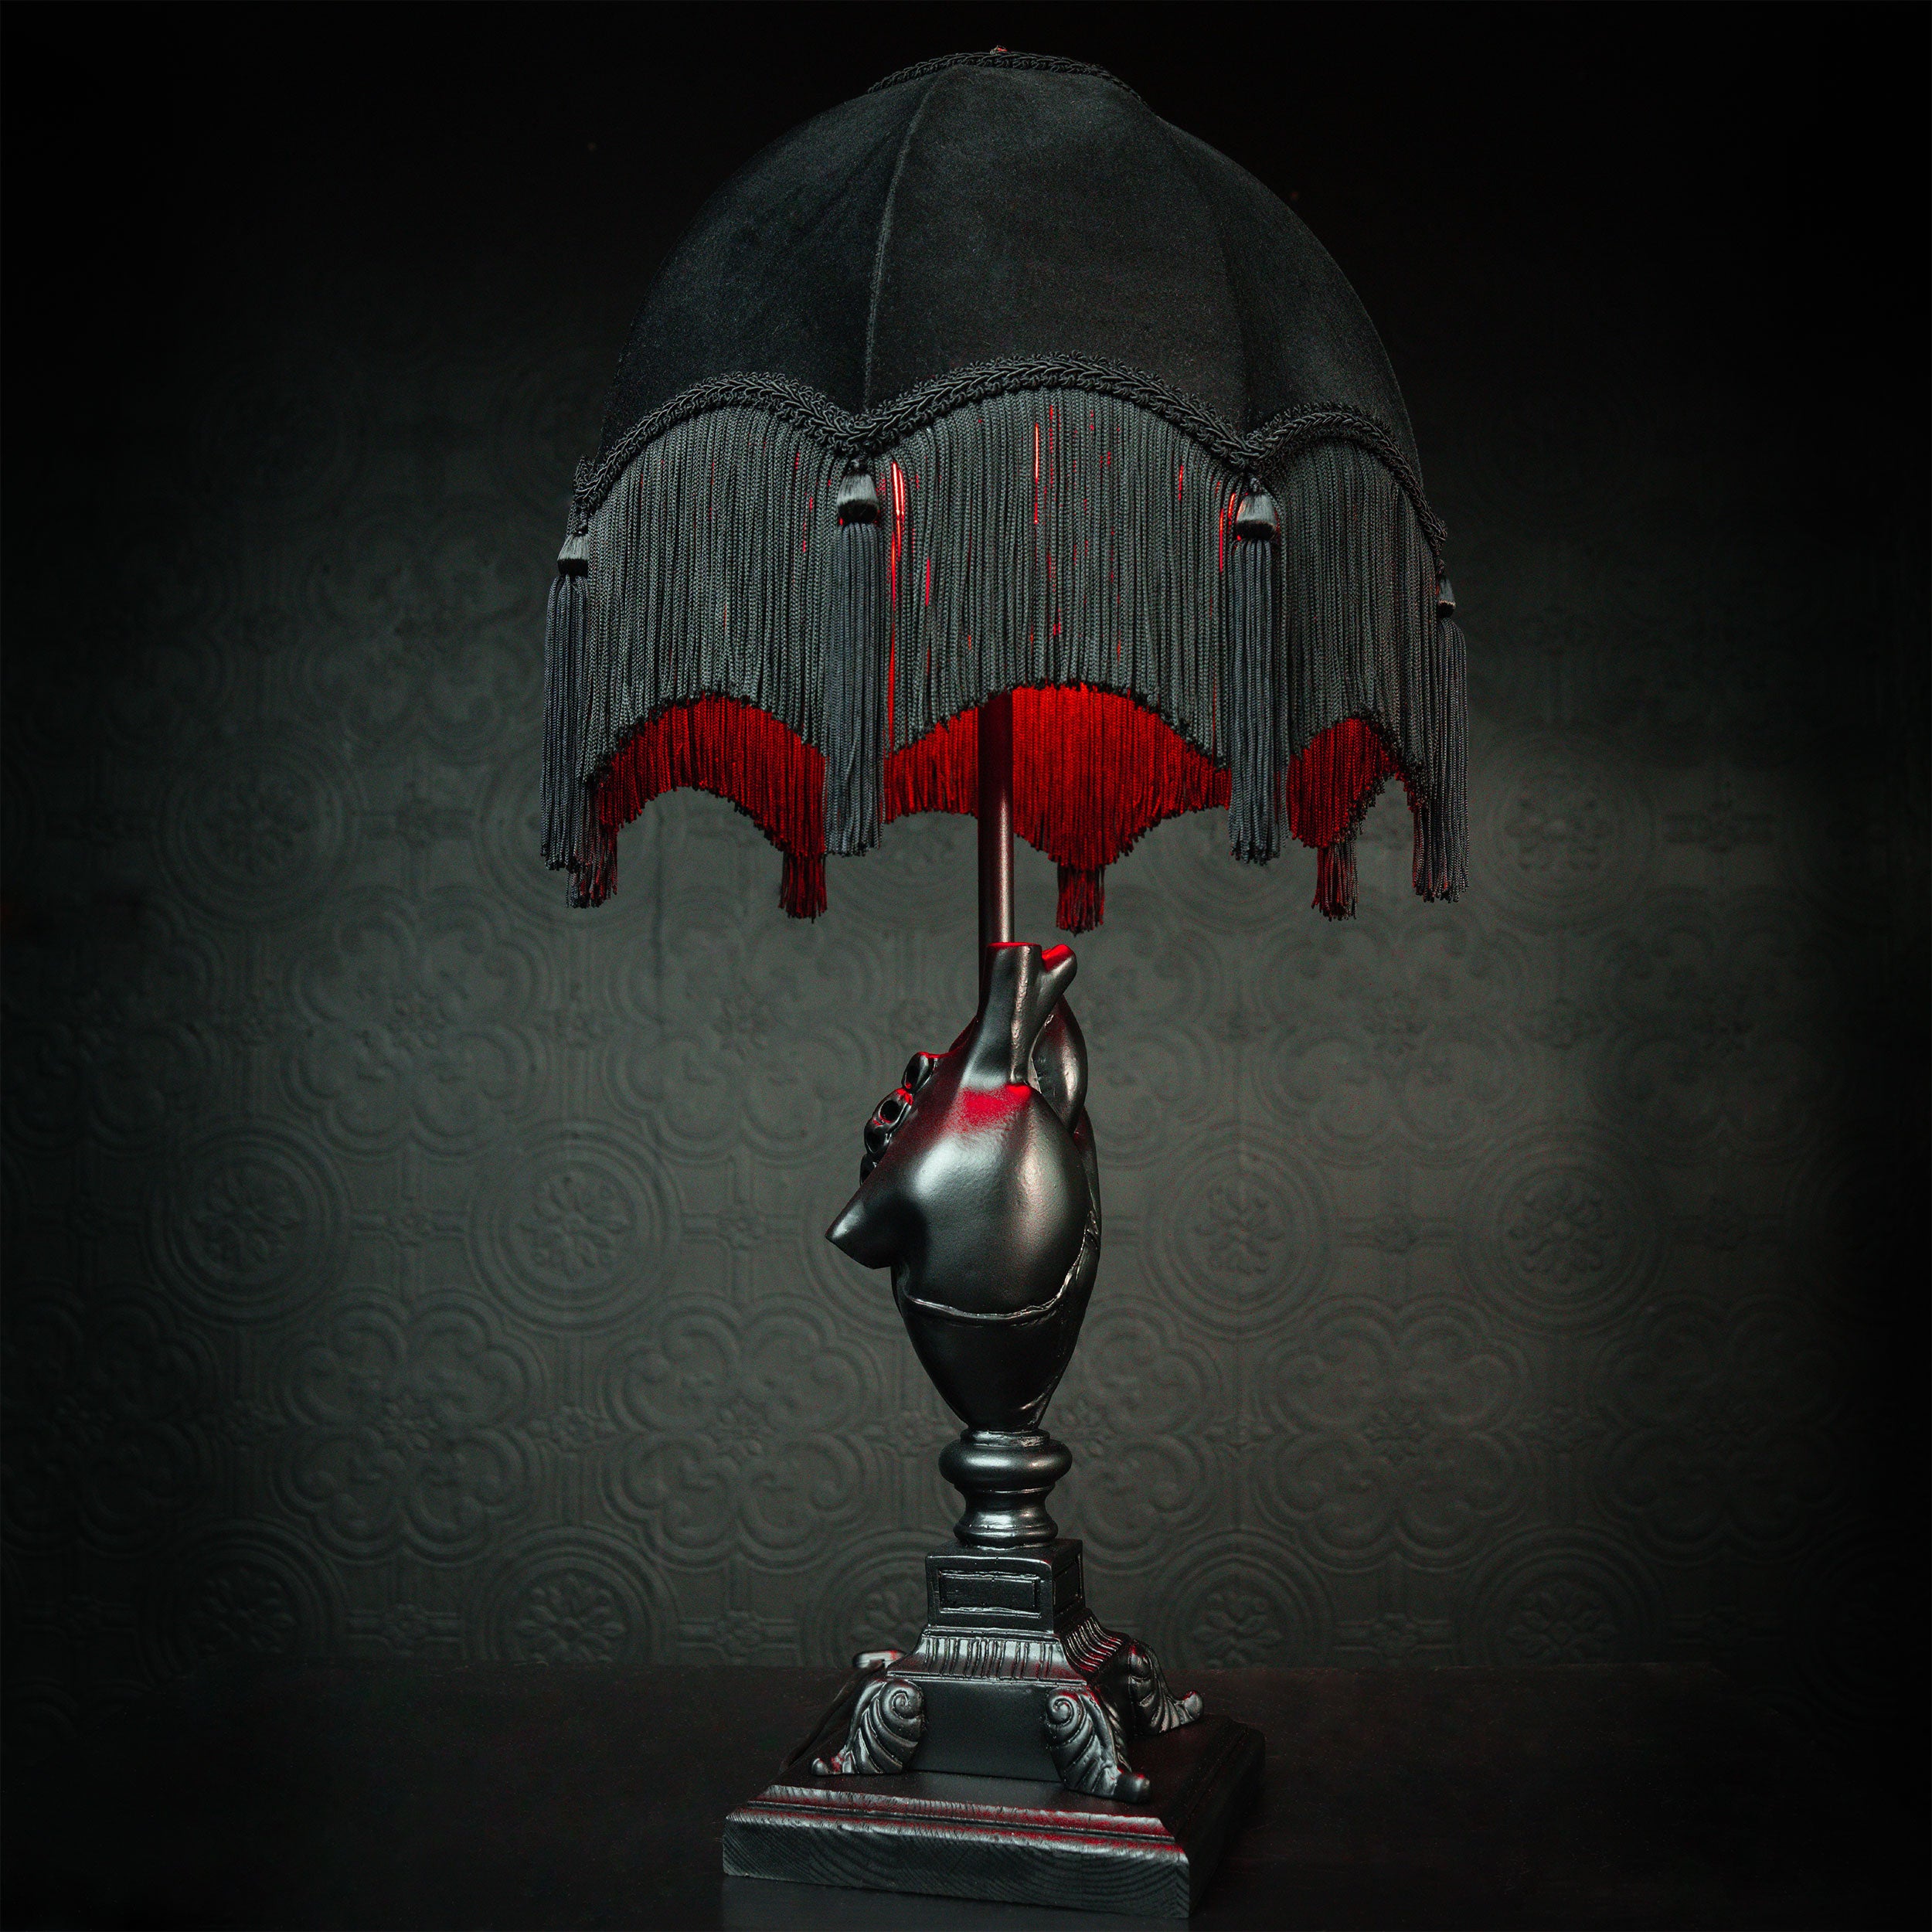 Anatomical heart lamp by the blackened teeth gothic home decor 